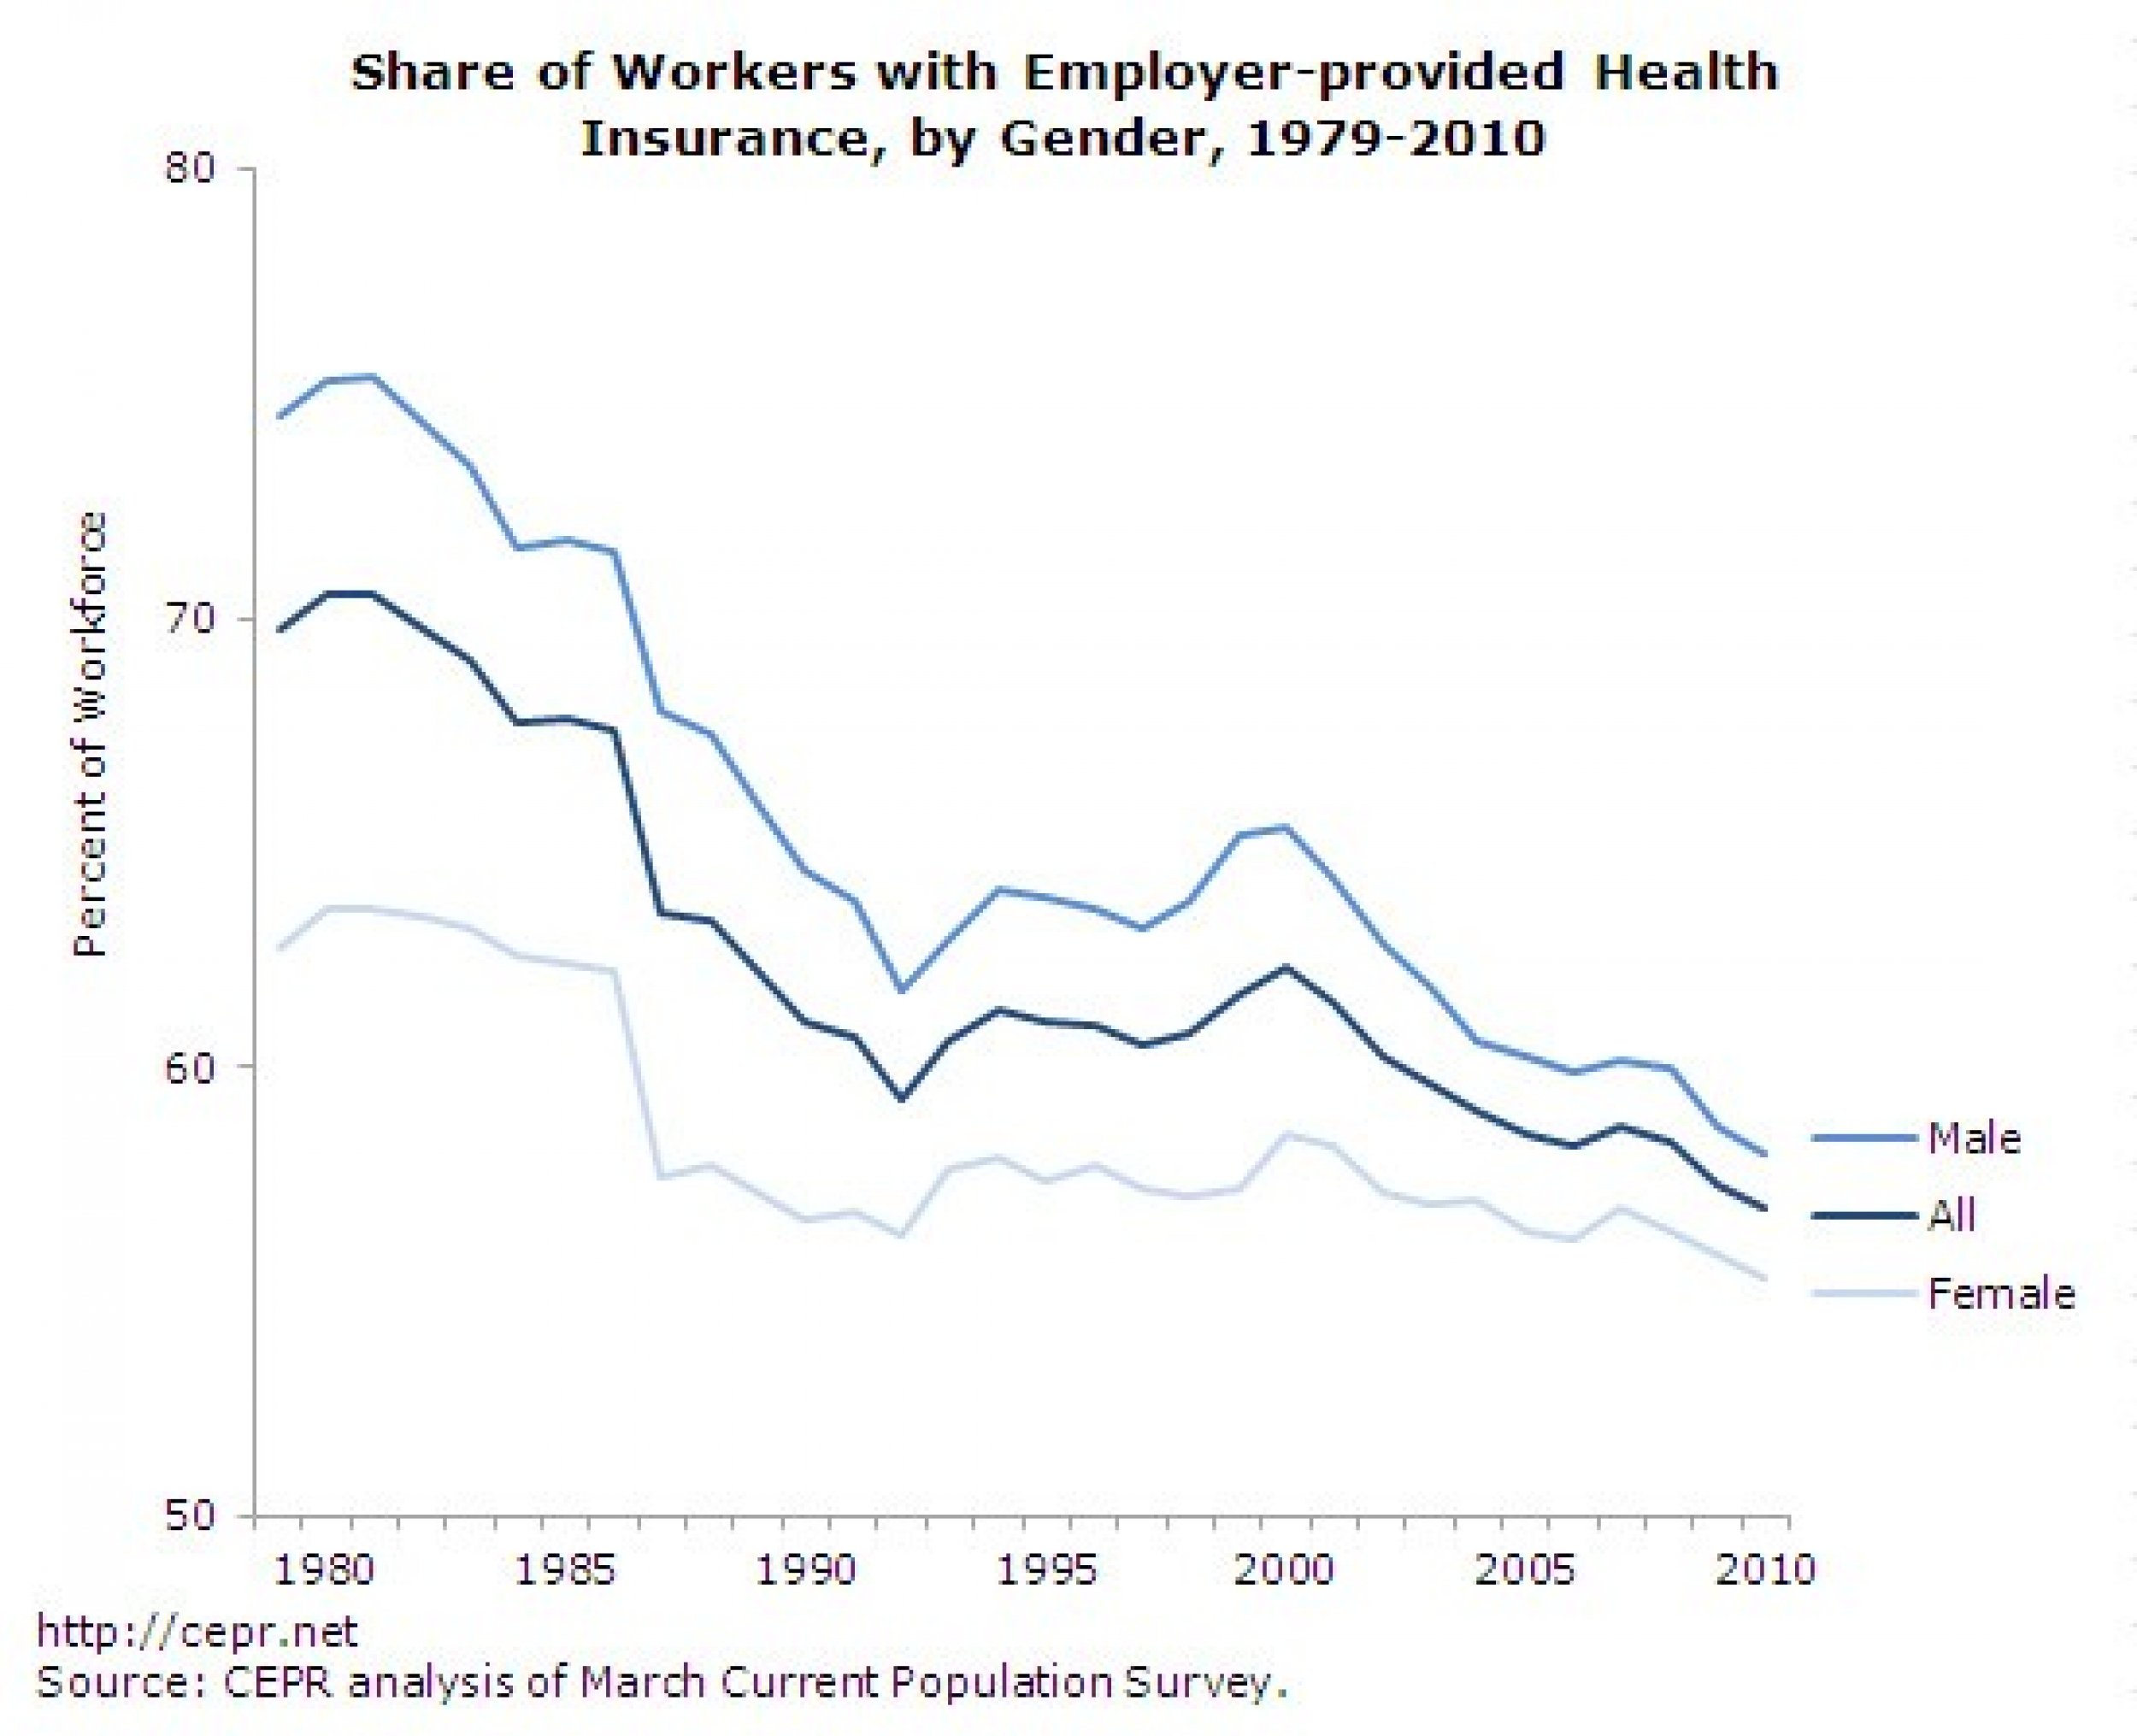 Share of Workers with Employer-provided Health Insurance, by Gender, 1979-2010